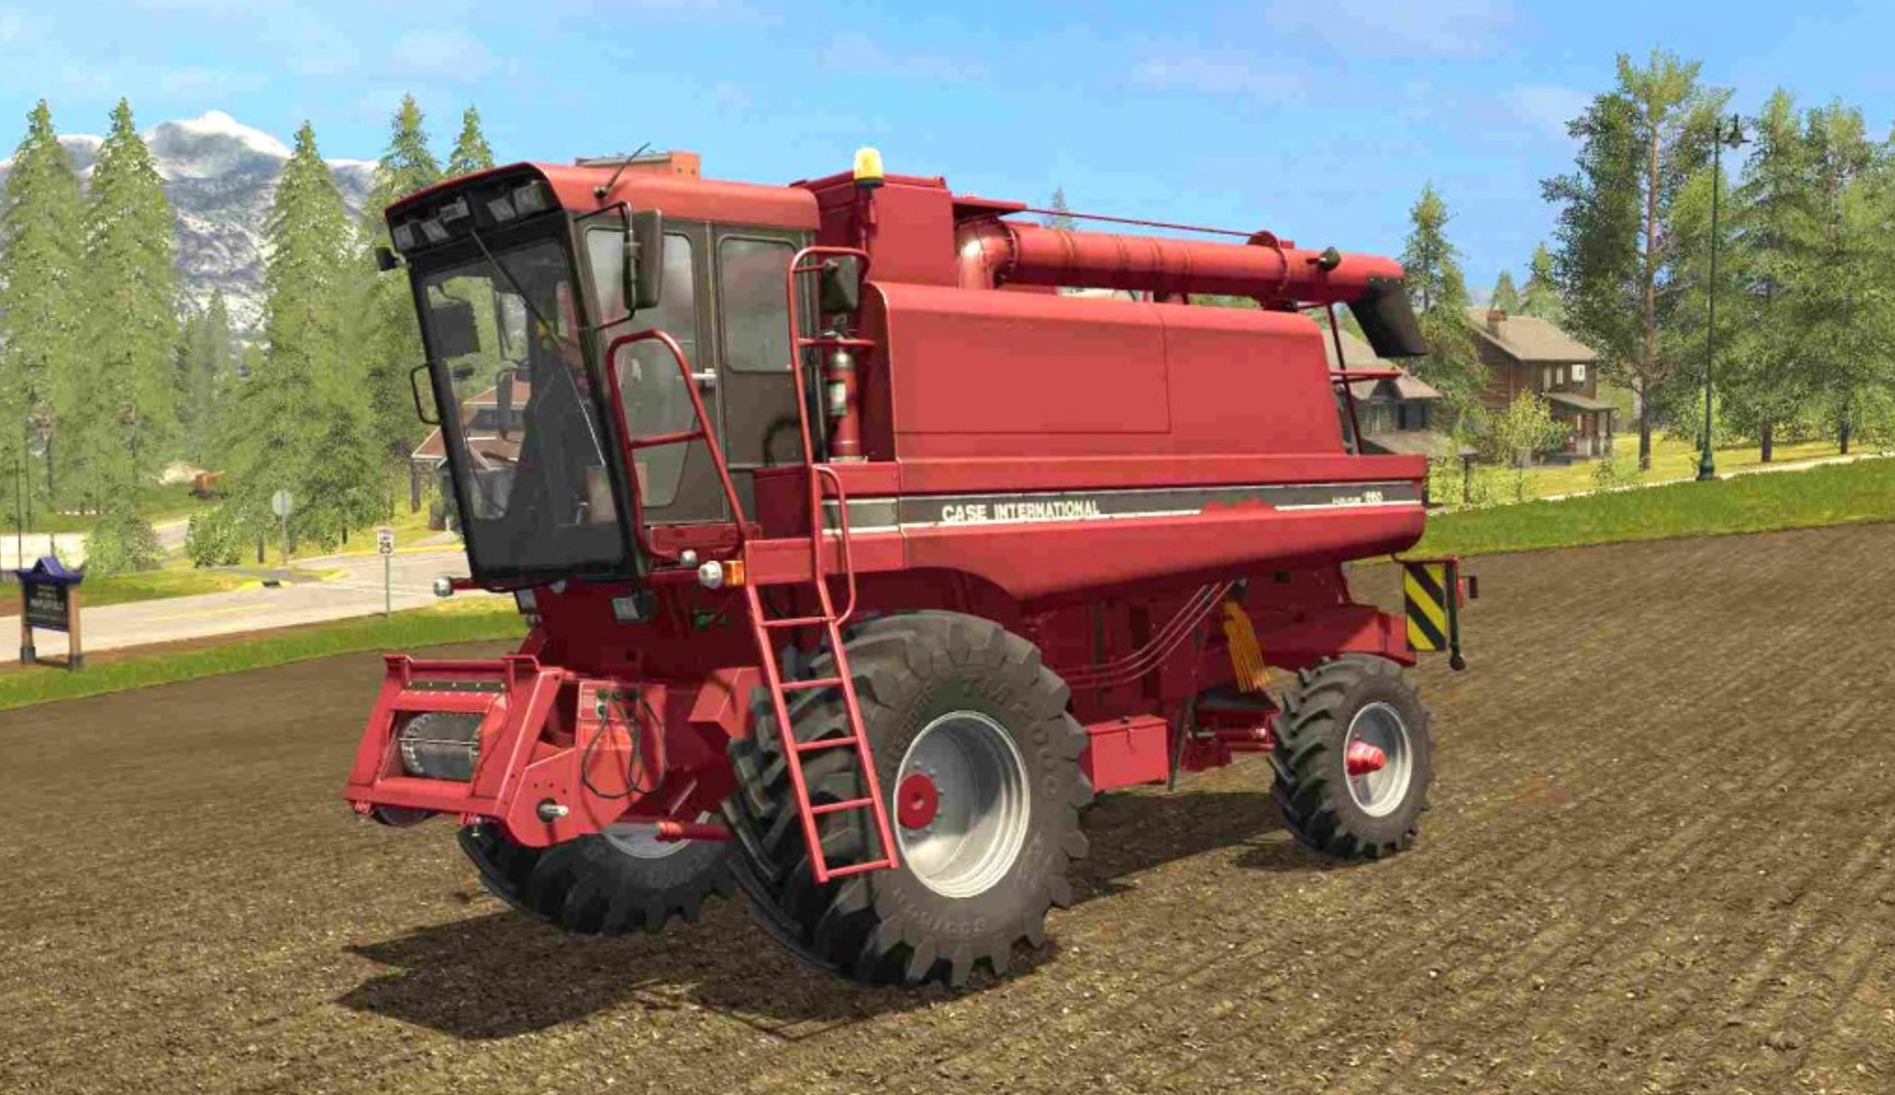 The CaseIH 1660 gives me the chance to use it because I do not like it beca...